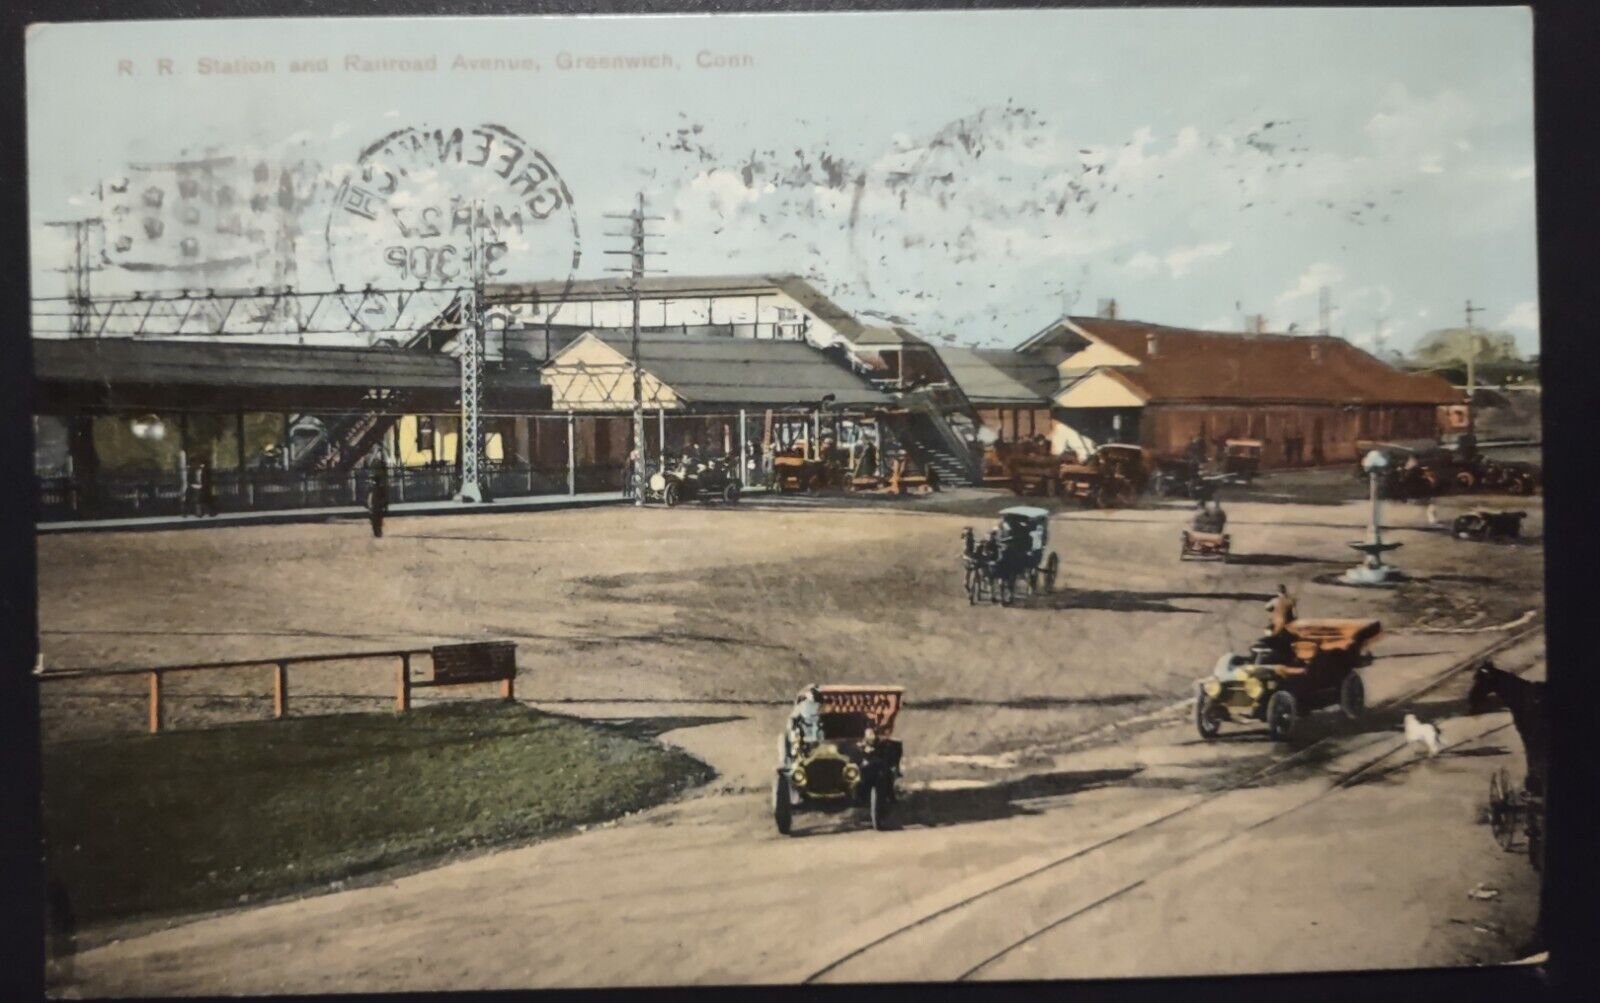 Postcard RR Station Railroad Avenue Greenwich Connecticut 1912 Old Cars Carriage